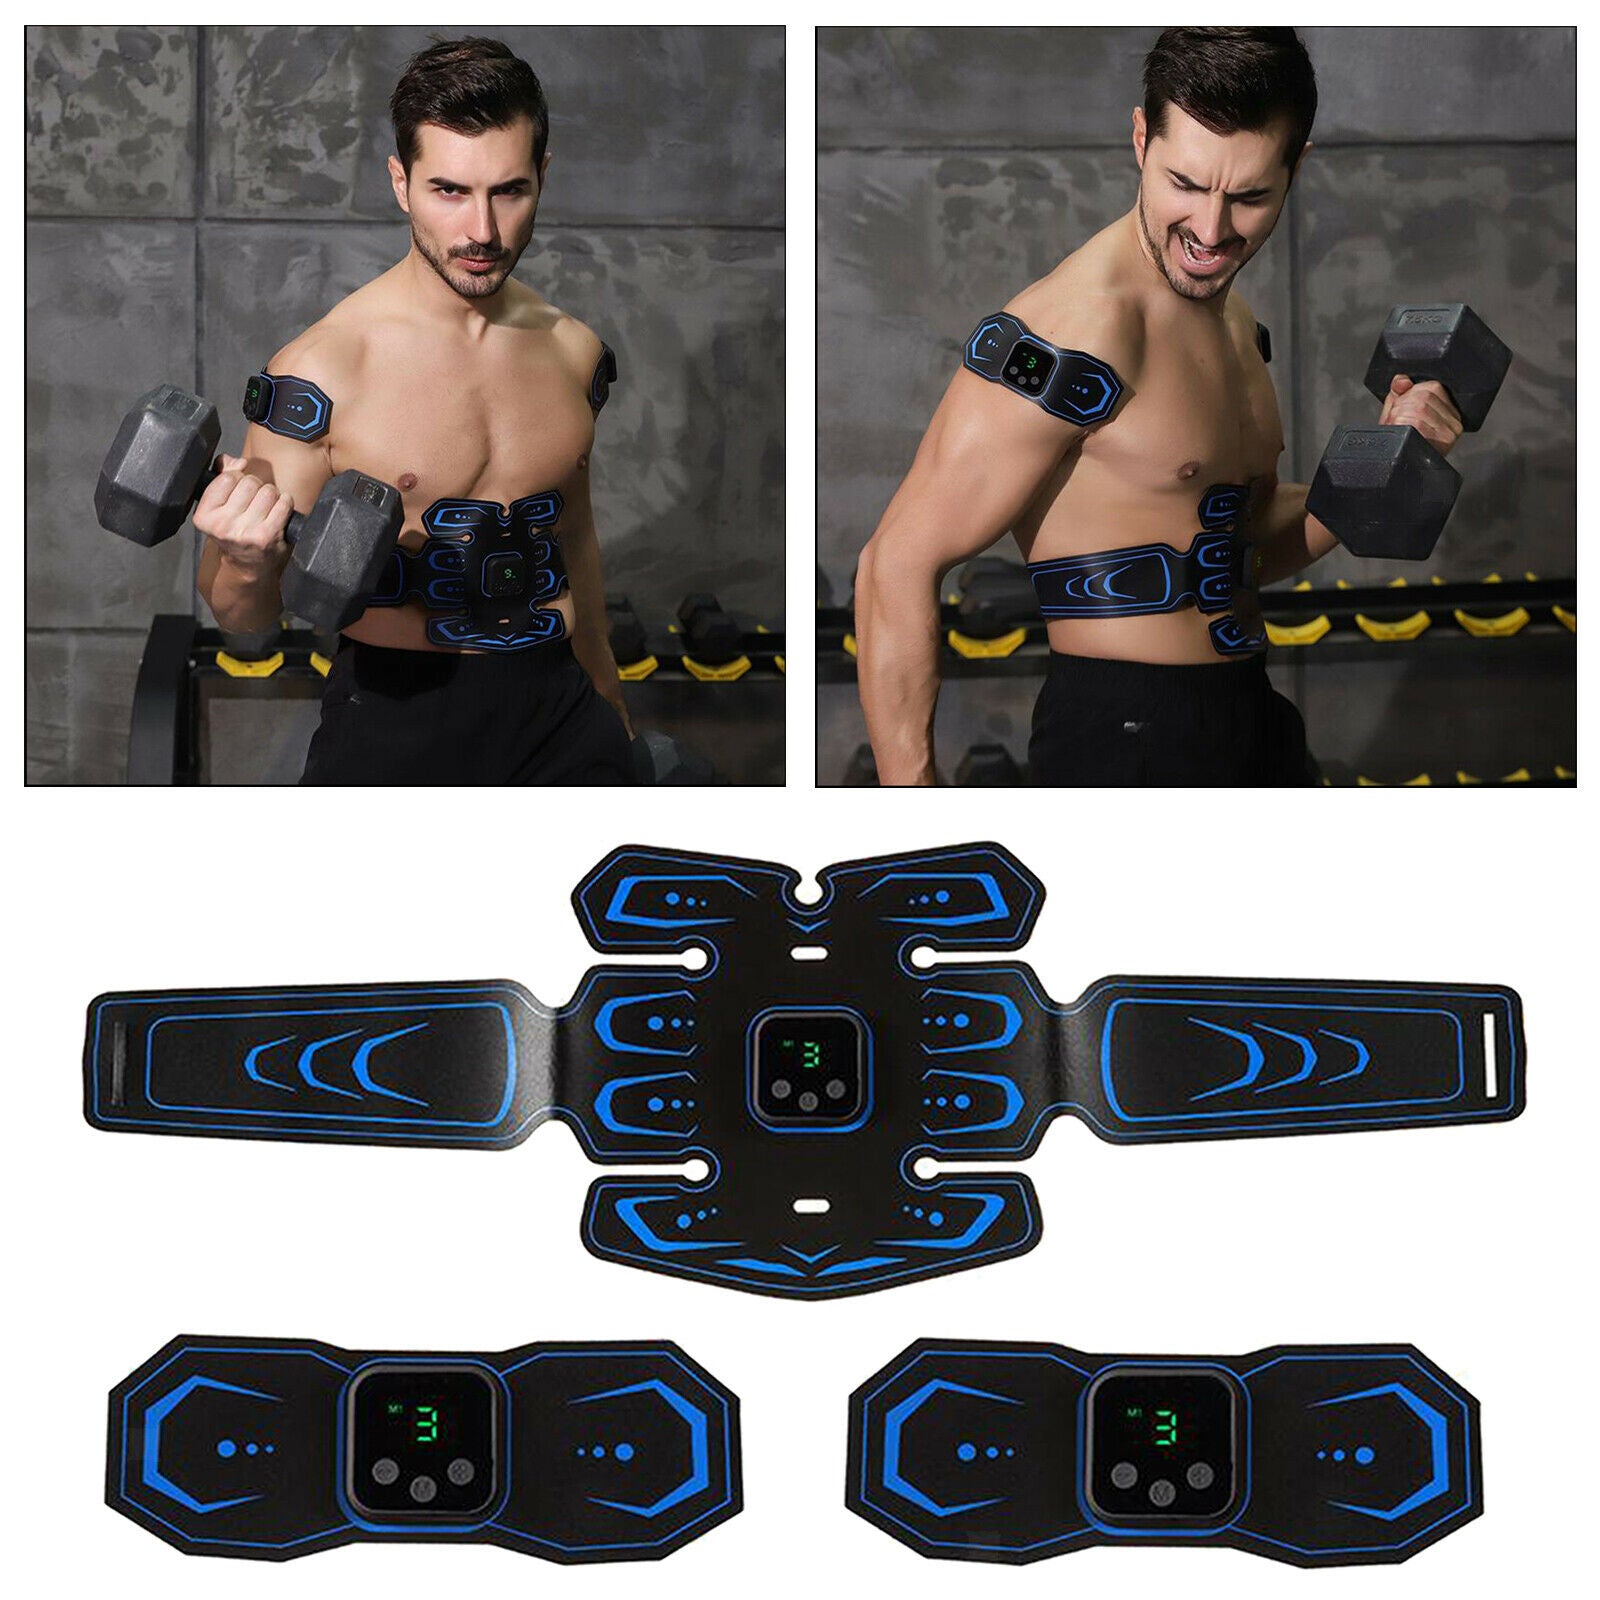 Rechargeable ABS Stimulator Muscle Abdominal Toning Belt AB Toner Massager